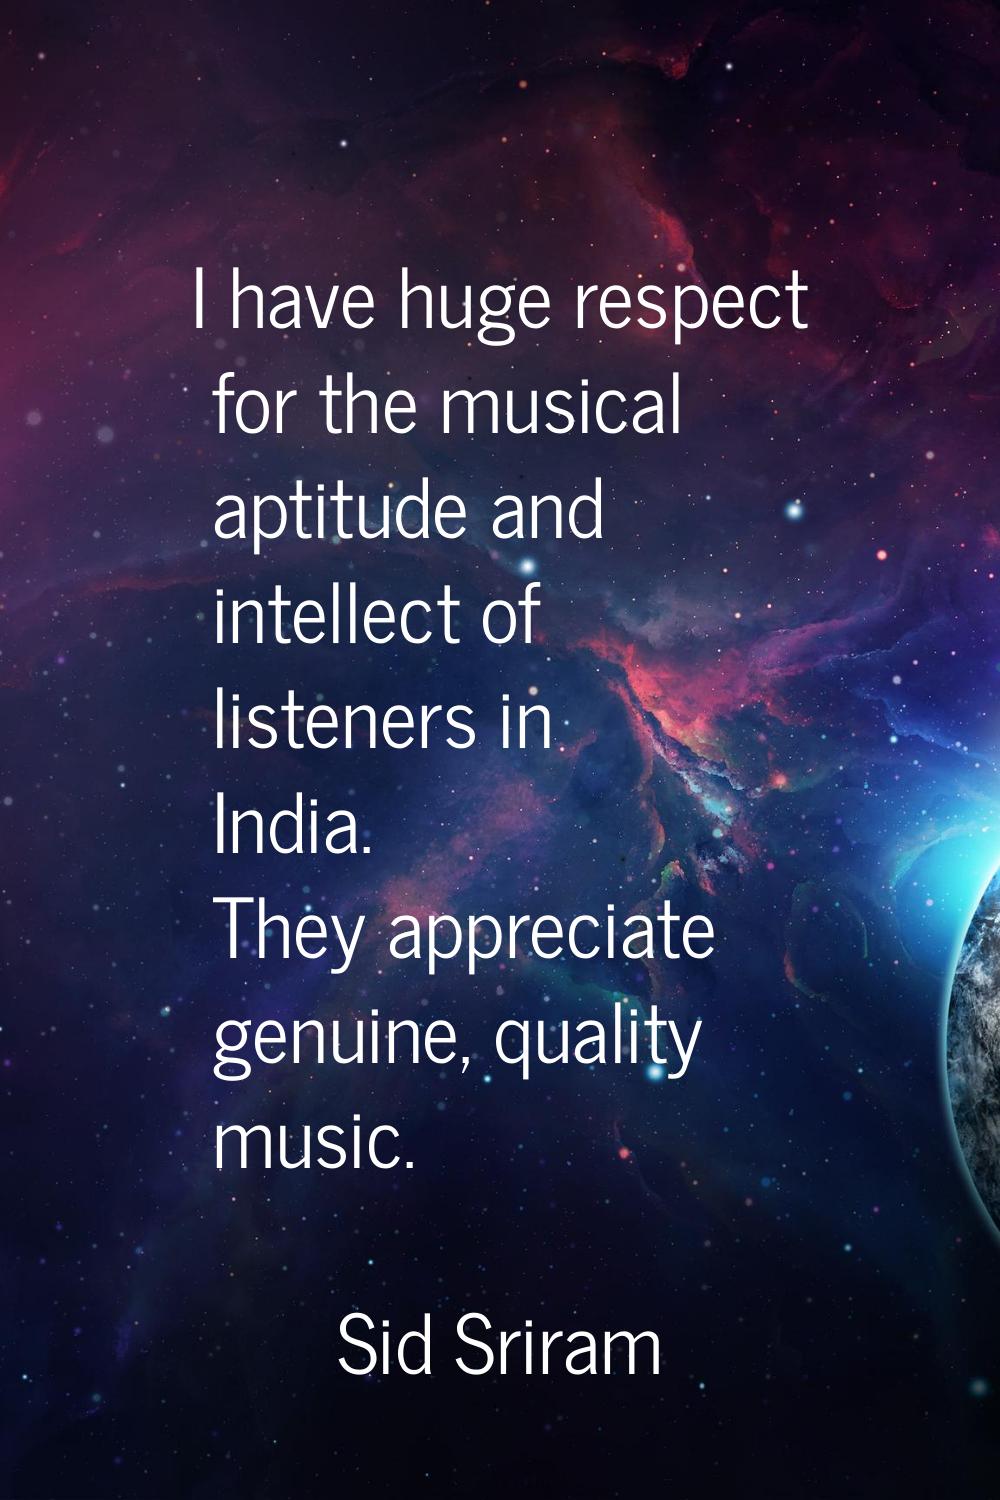 I have huge respect for the musical aptitude and intellect of listeners in India. They appreciate g